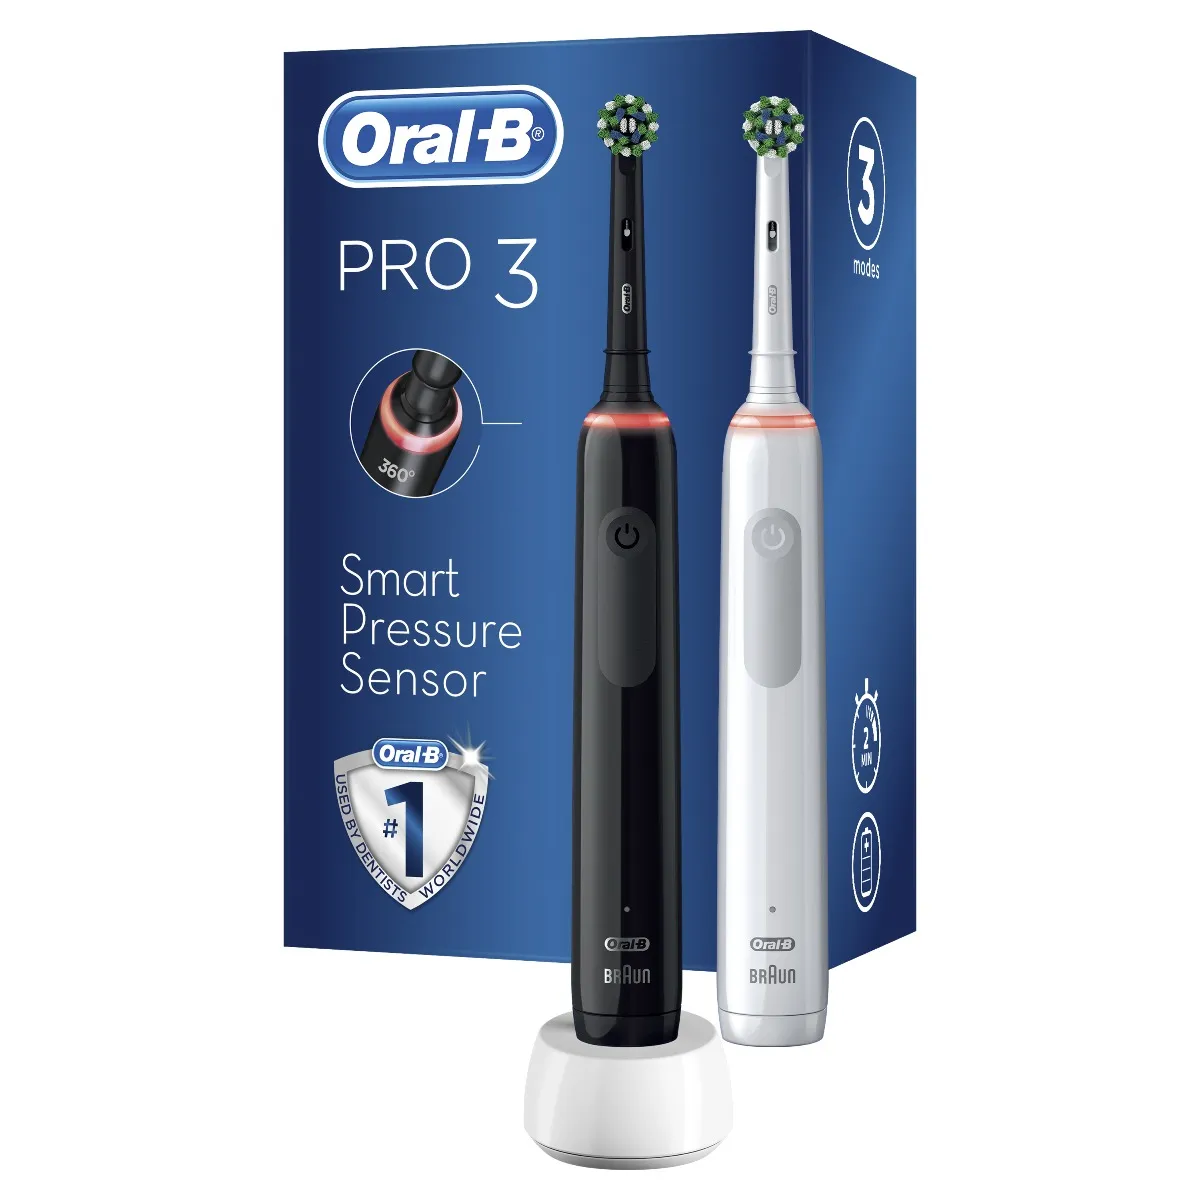 Oral-B PRO 3 3900 Cross Action DUO